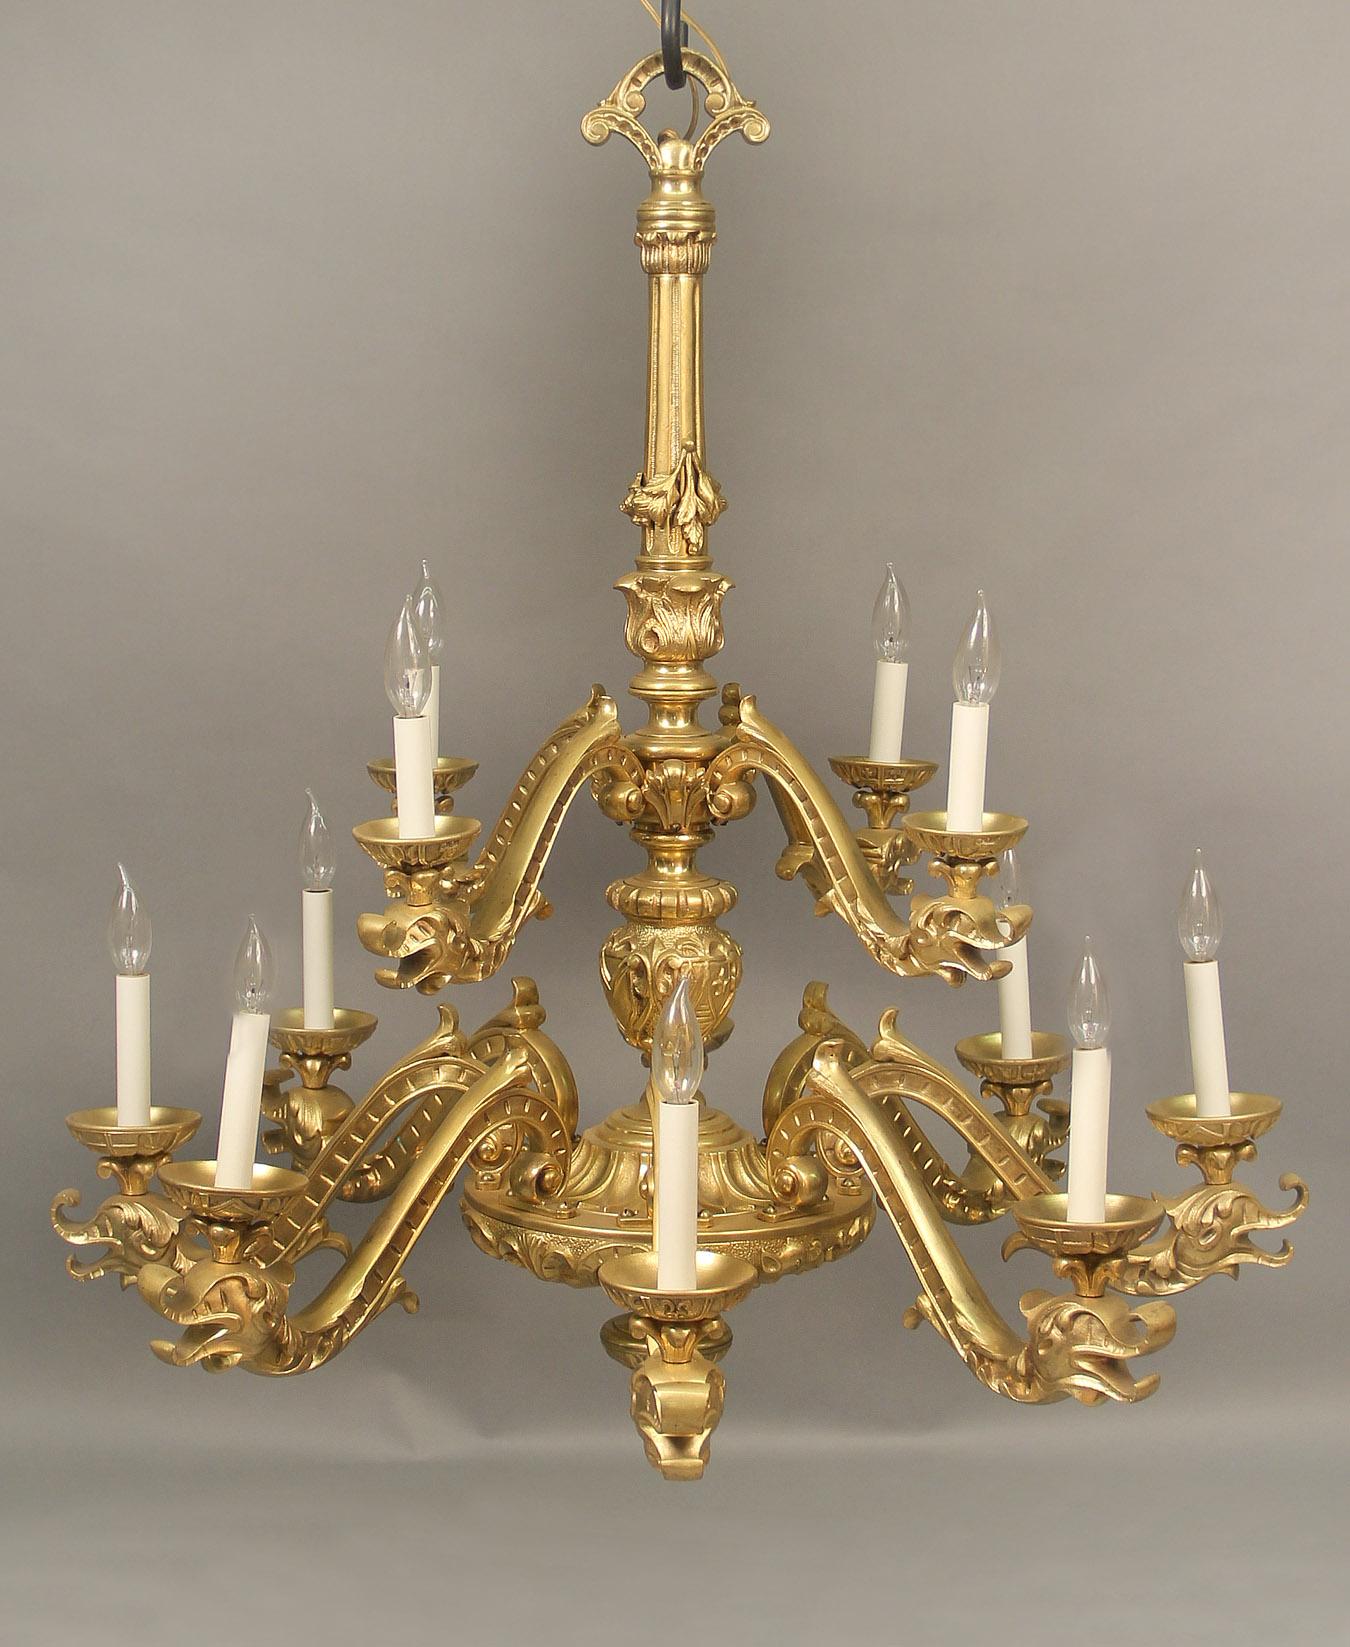 An Very Interesting Late 19th Century Gilt Bronze Twelve Light Chandelier

The long neck winding down to a flame and a small tier of four arms, the body intricately designed with fleur de lis and leading to a larger tier with eight arms, each of the